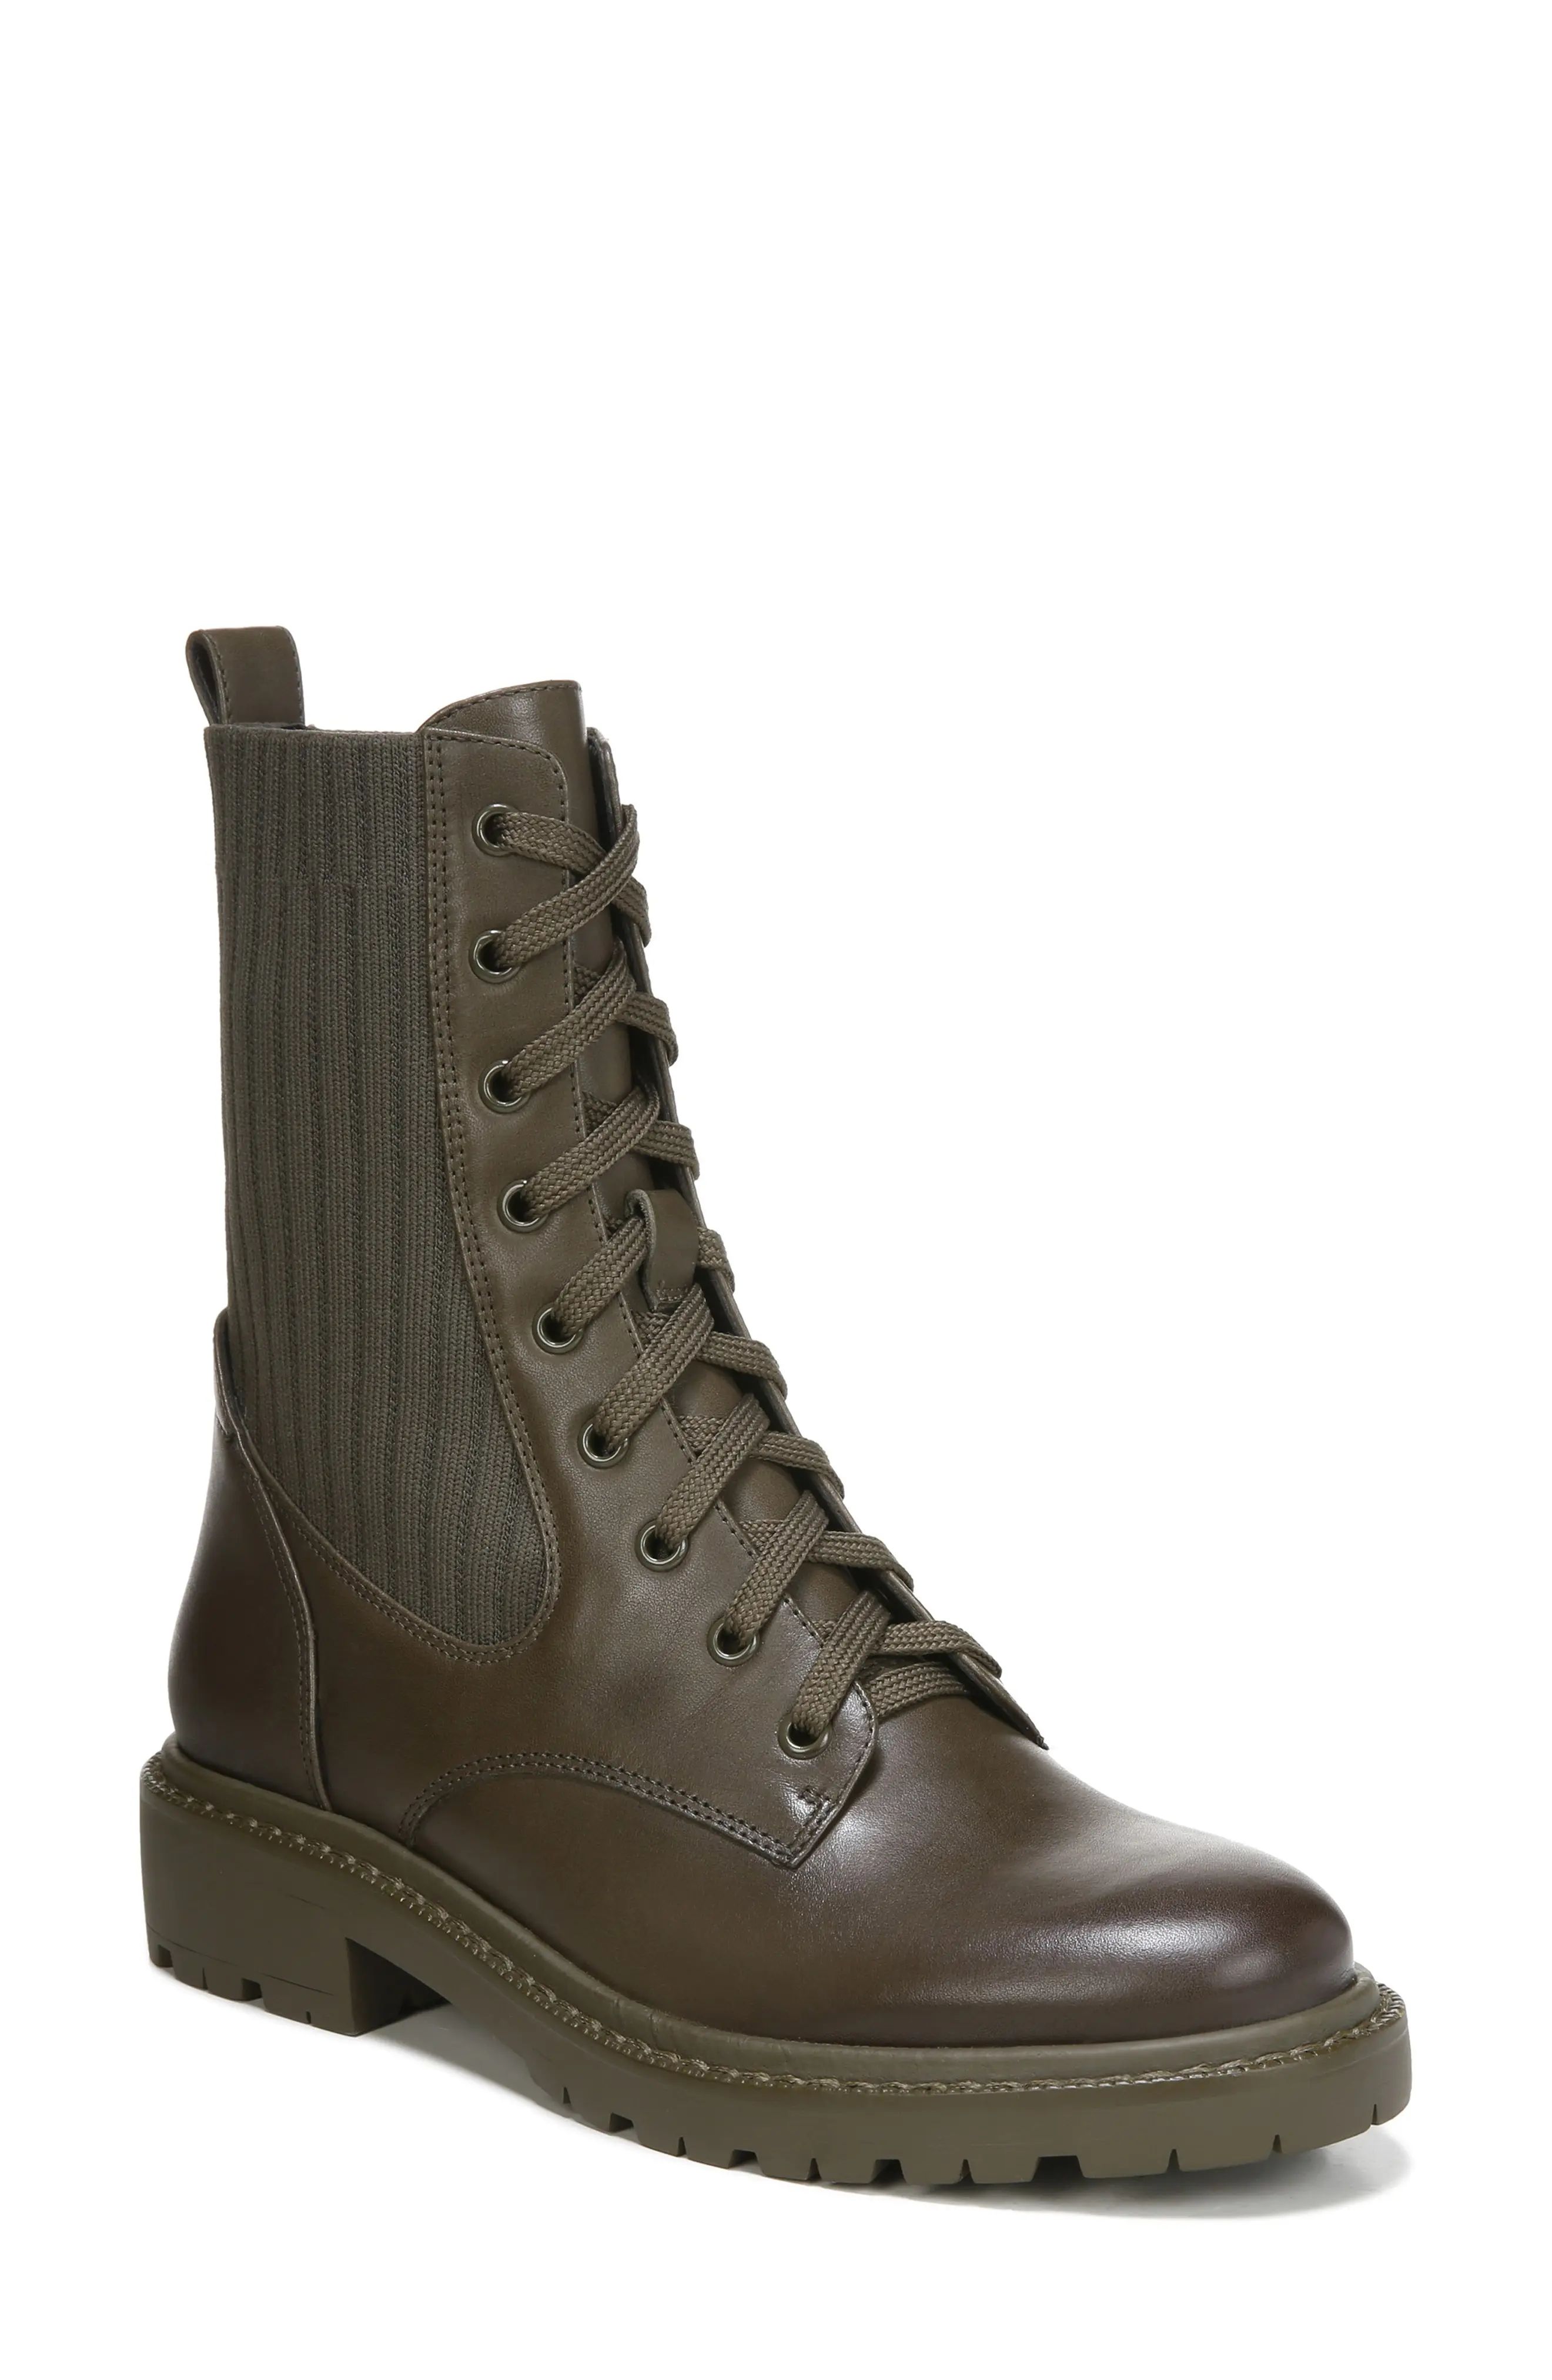 Sam Edelman Lydell Mixed Media Combat Boot, Size 8.5 in Alpine Green at Nordstrom | Nordstrom